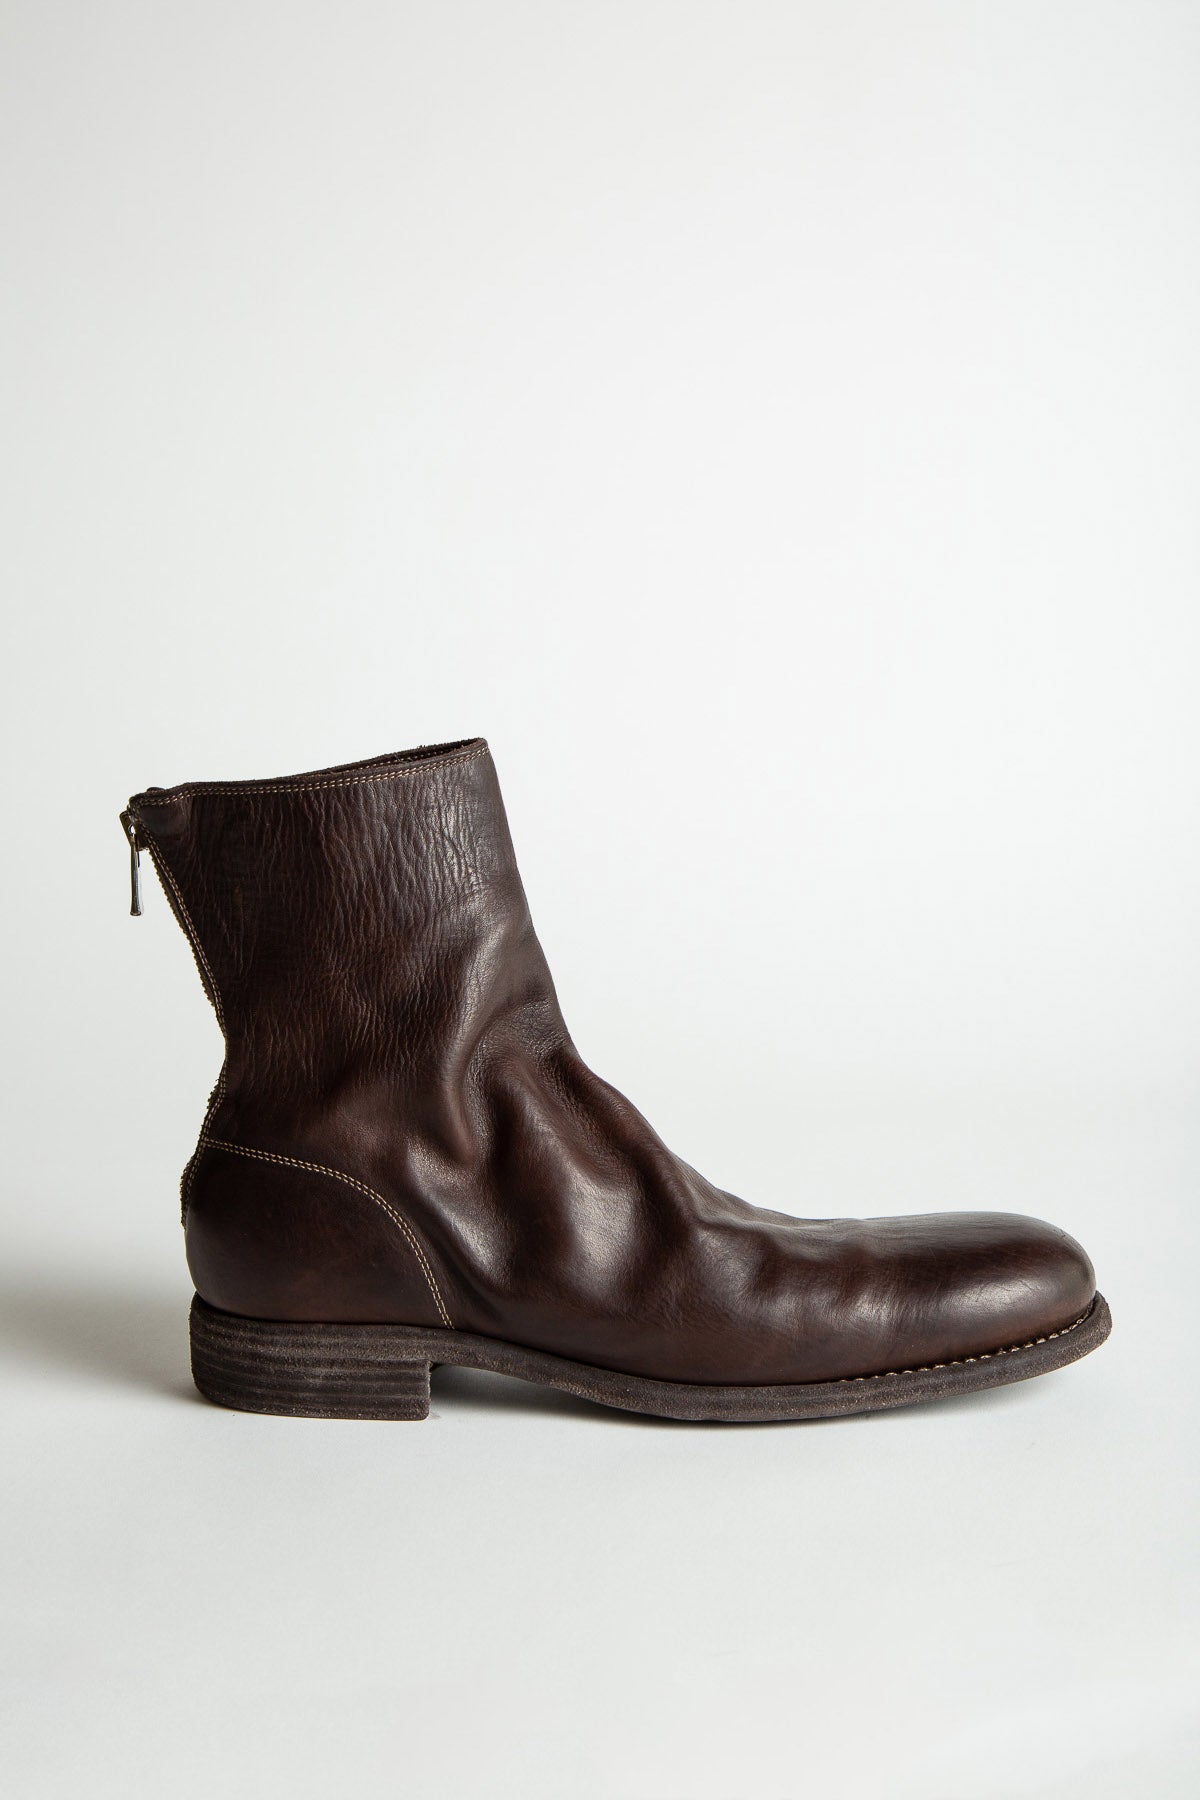 GUIDI | 986 BACK ZIP BOOTS